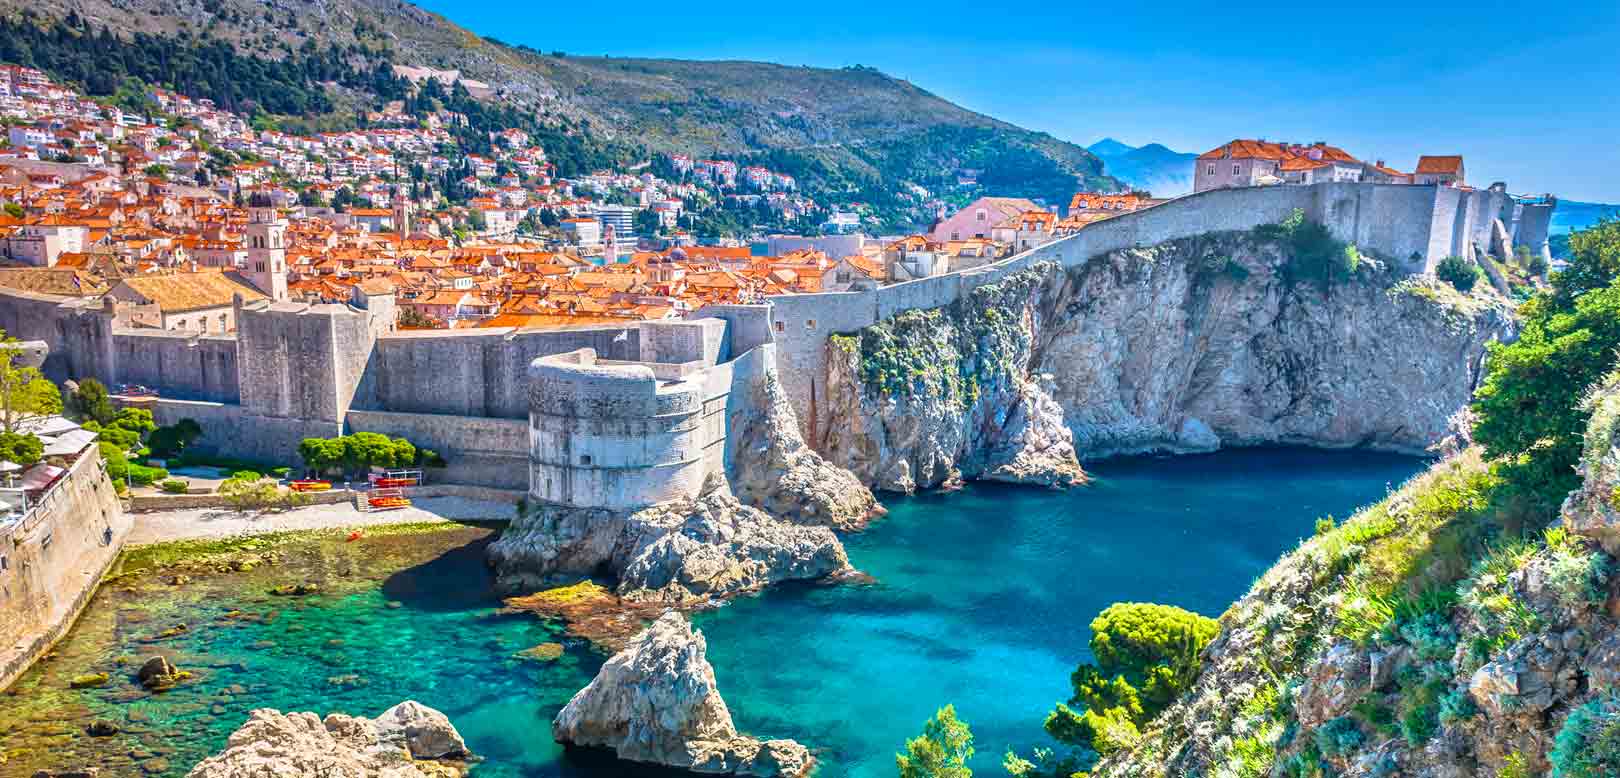 Things to Do in Dubrovnik : City Walls